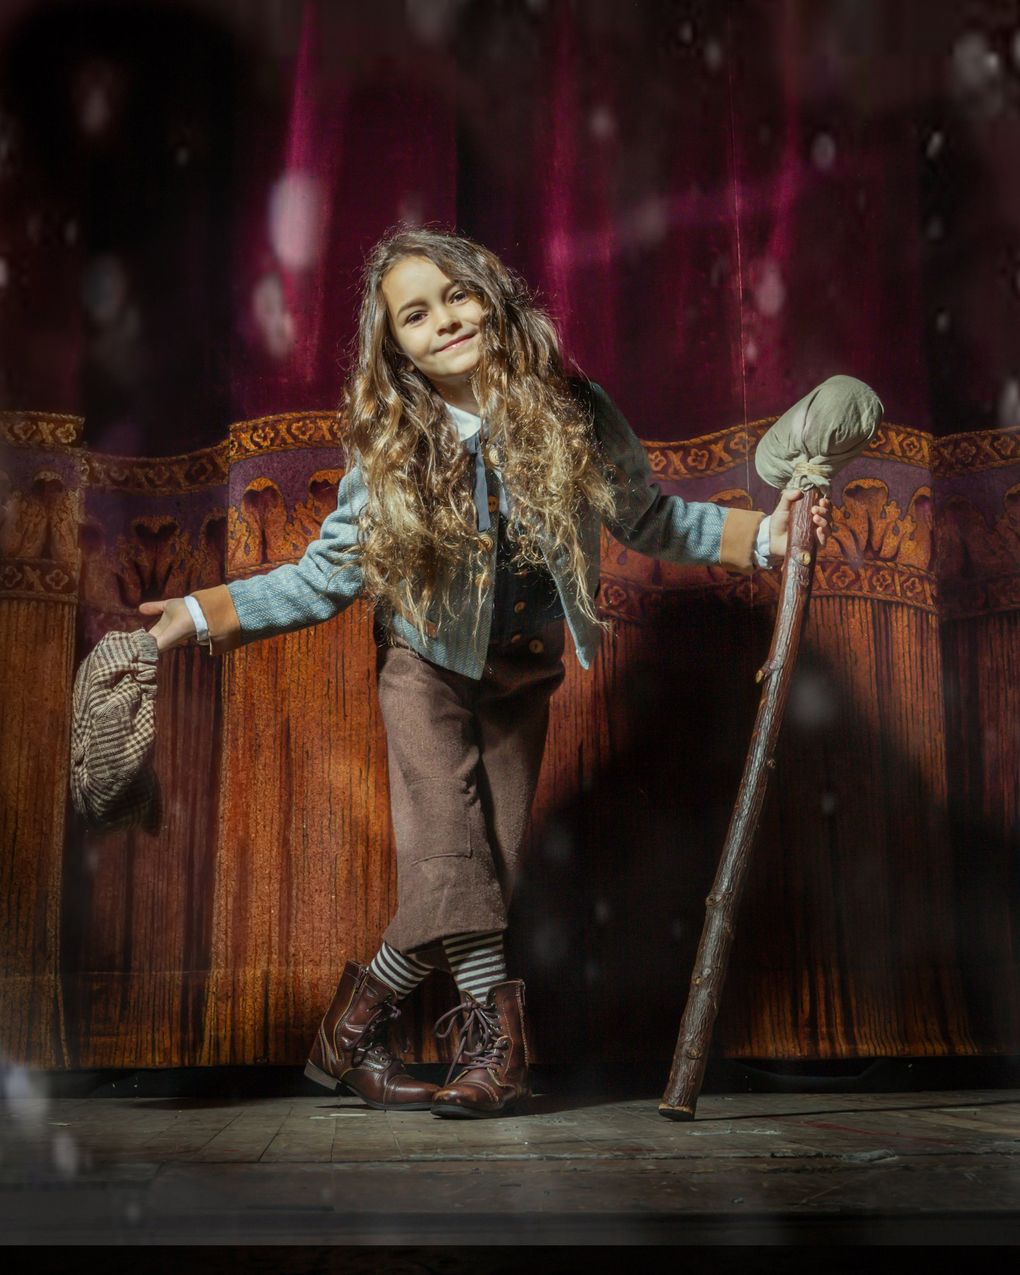 Piper Harden played Tiny Tim in ACT’s “A Christmas Carol” in 2019. She’s reprising her role this year in ACT’s radio-play-style production. (Rosemary DaiRoss)